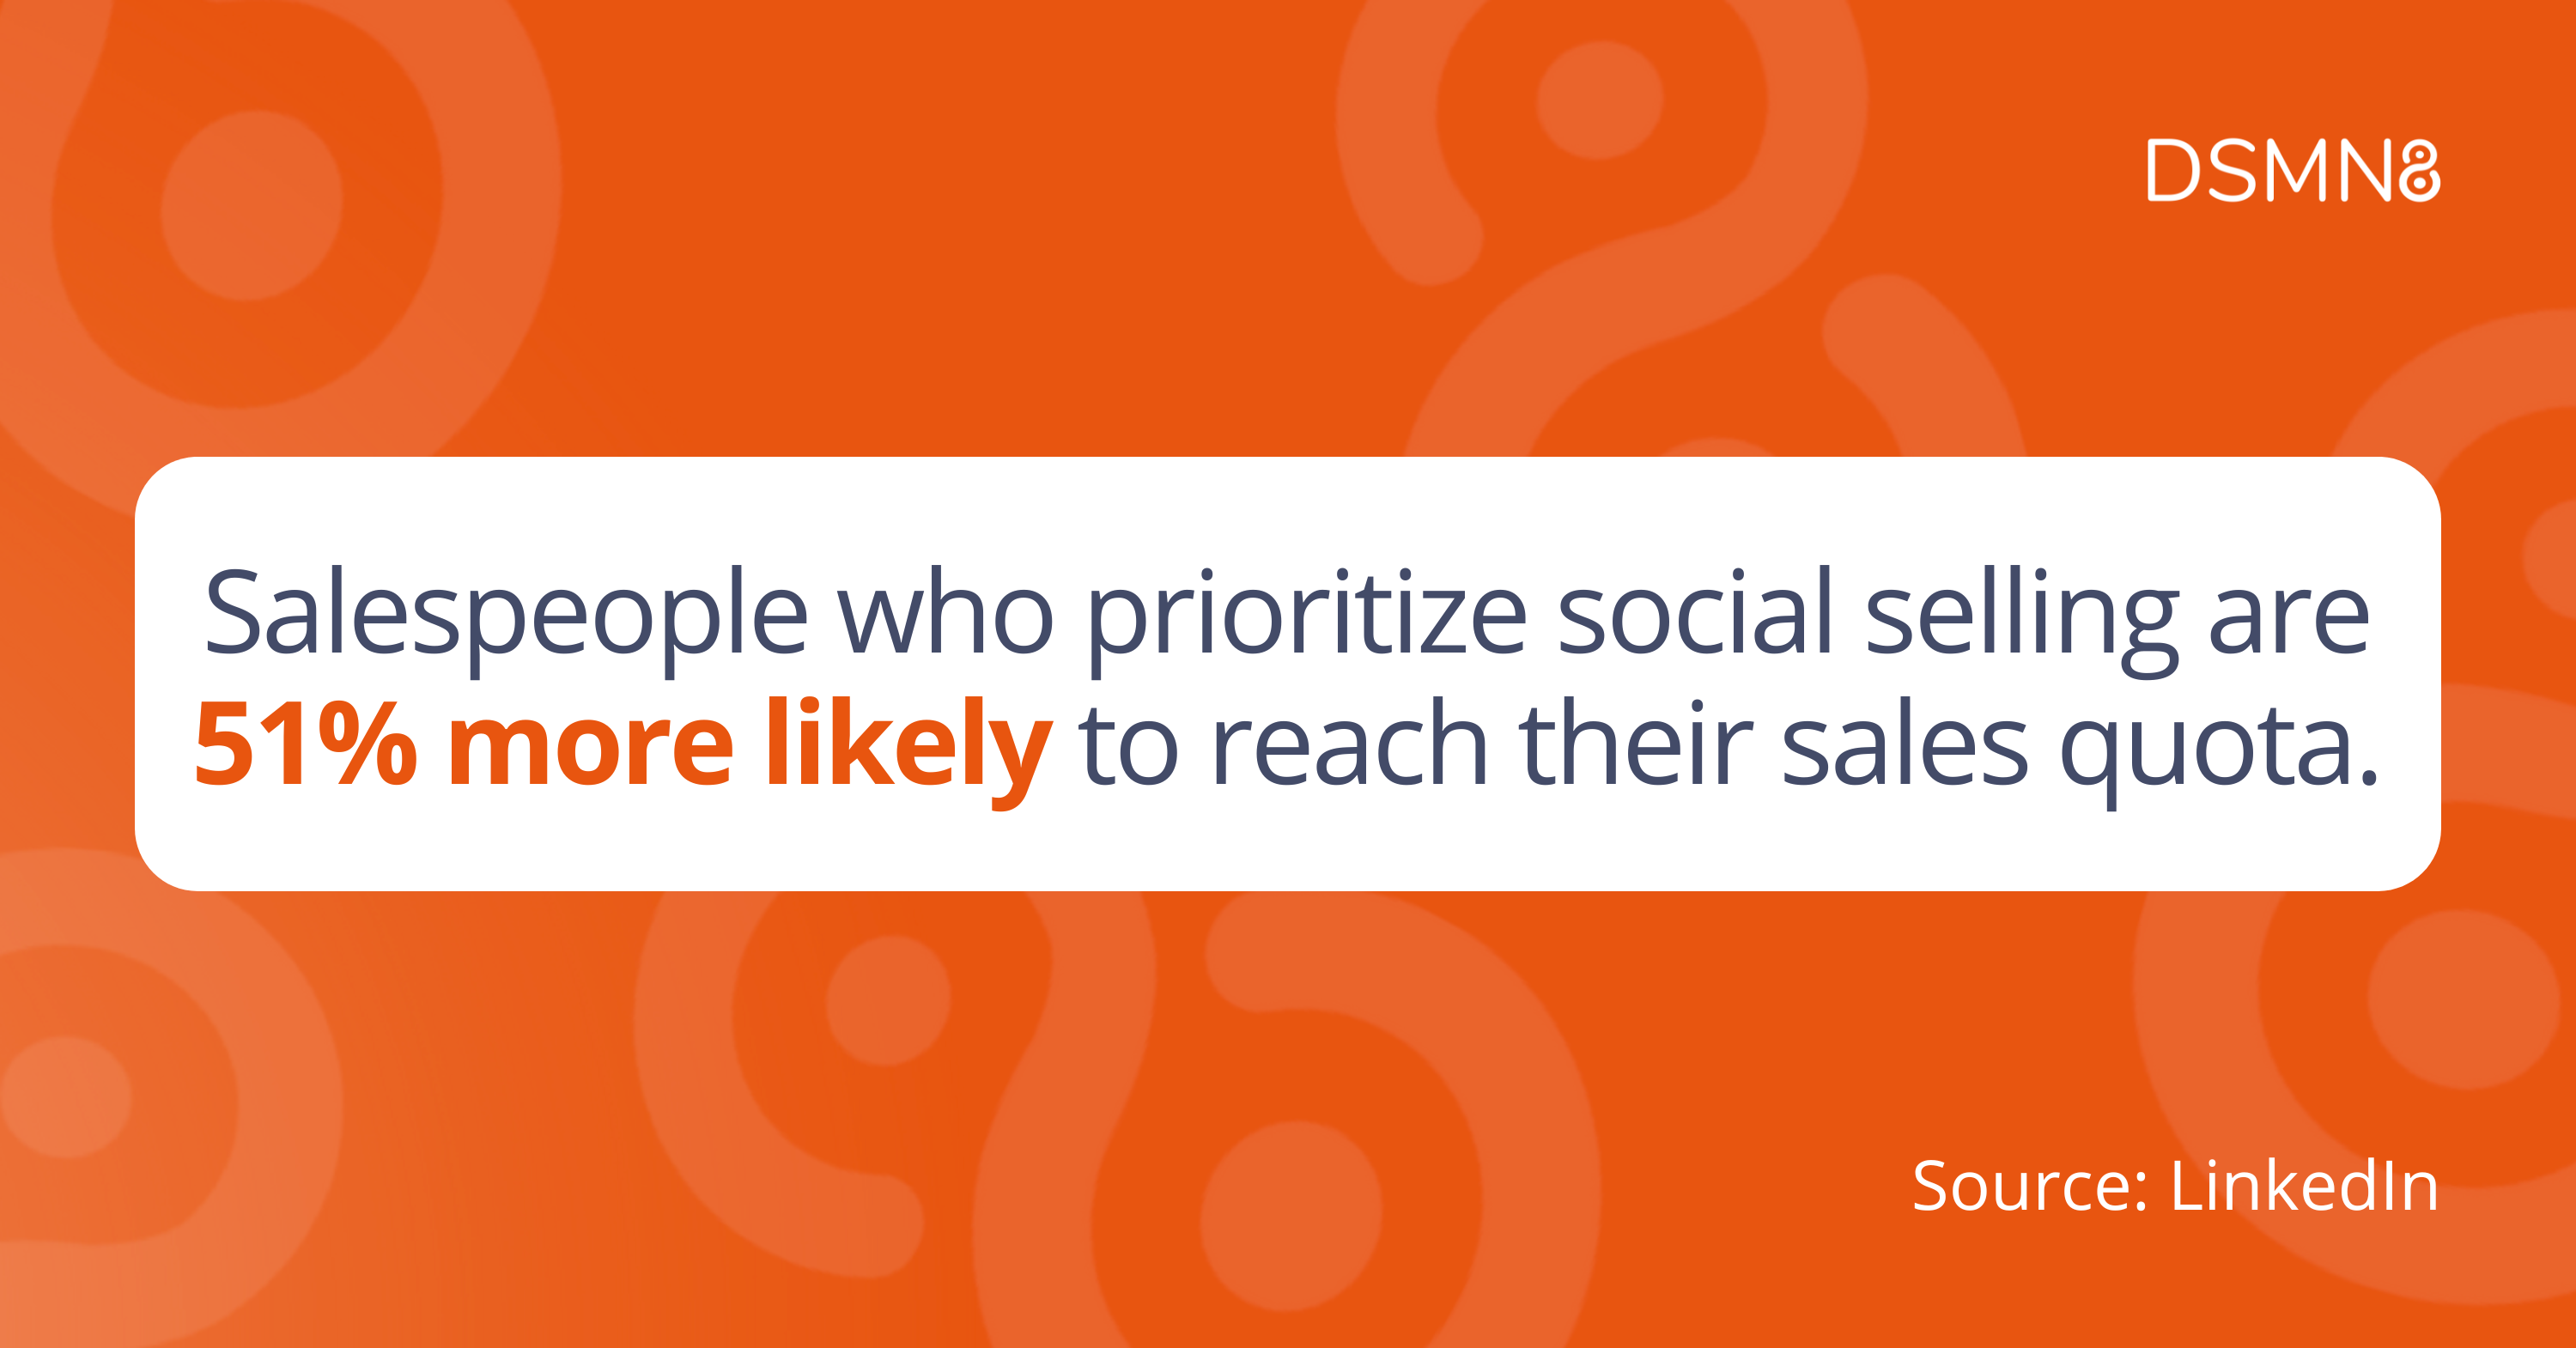 Salespeople who prioritize social selling are 51% more likely to reach their sales quota.